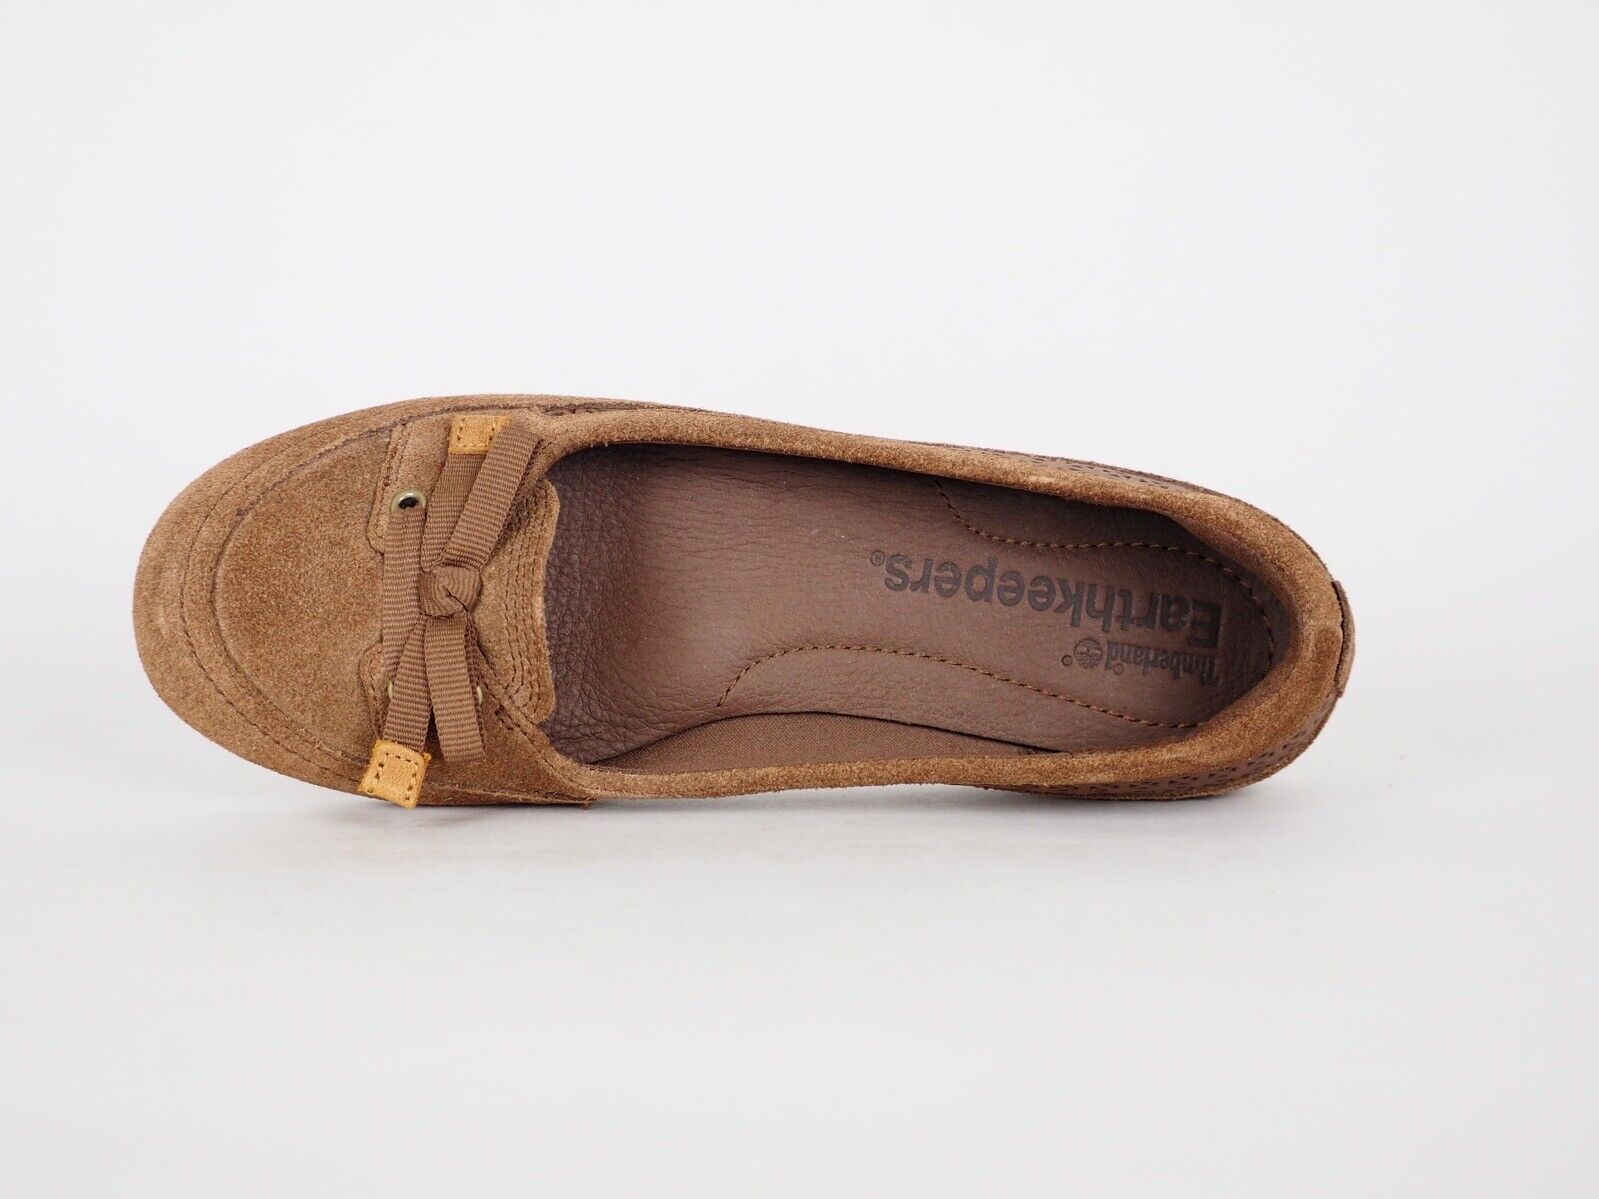 Womens Timberland Falmouth 8021R Brown Suede Slip On Ballerina Shoes UK 4.5 - London Top Style